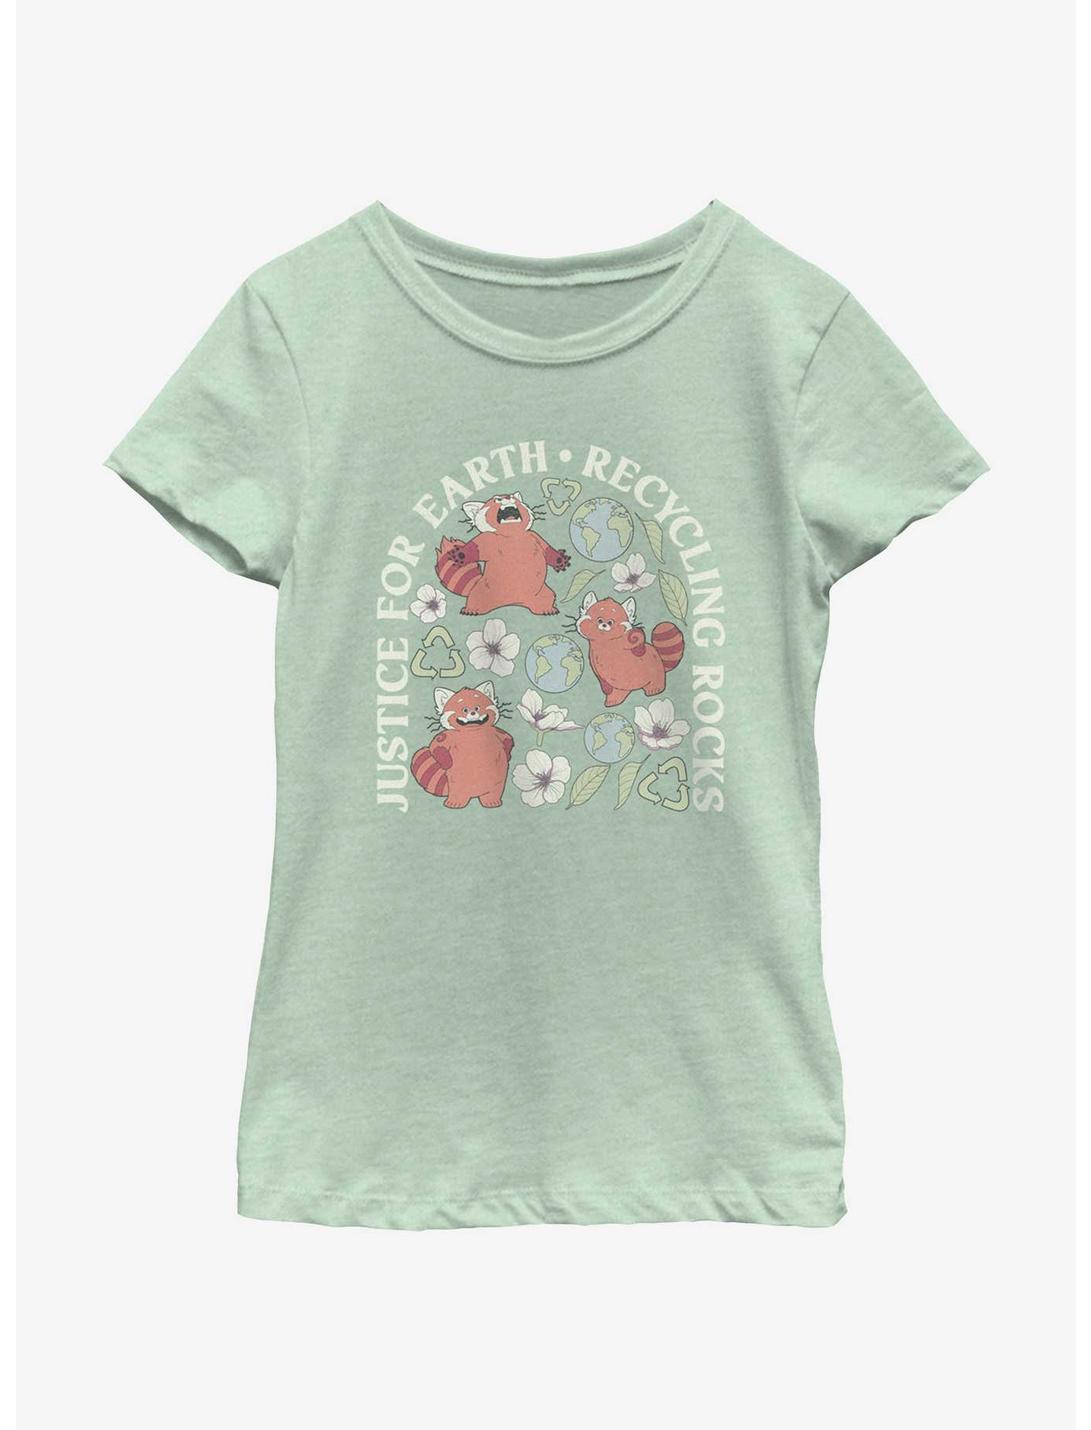 Disney Pixar Turning Red Justice For Earth Recycling Rocks Youth Girls T-Shirt, MINT, hi-res